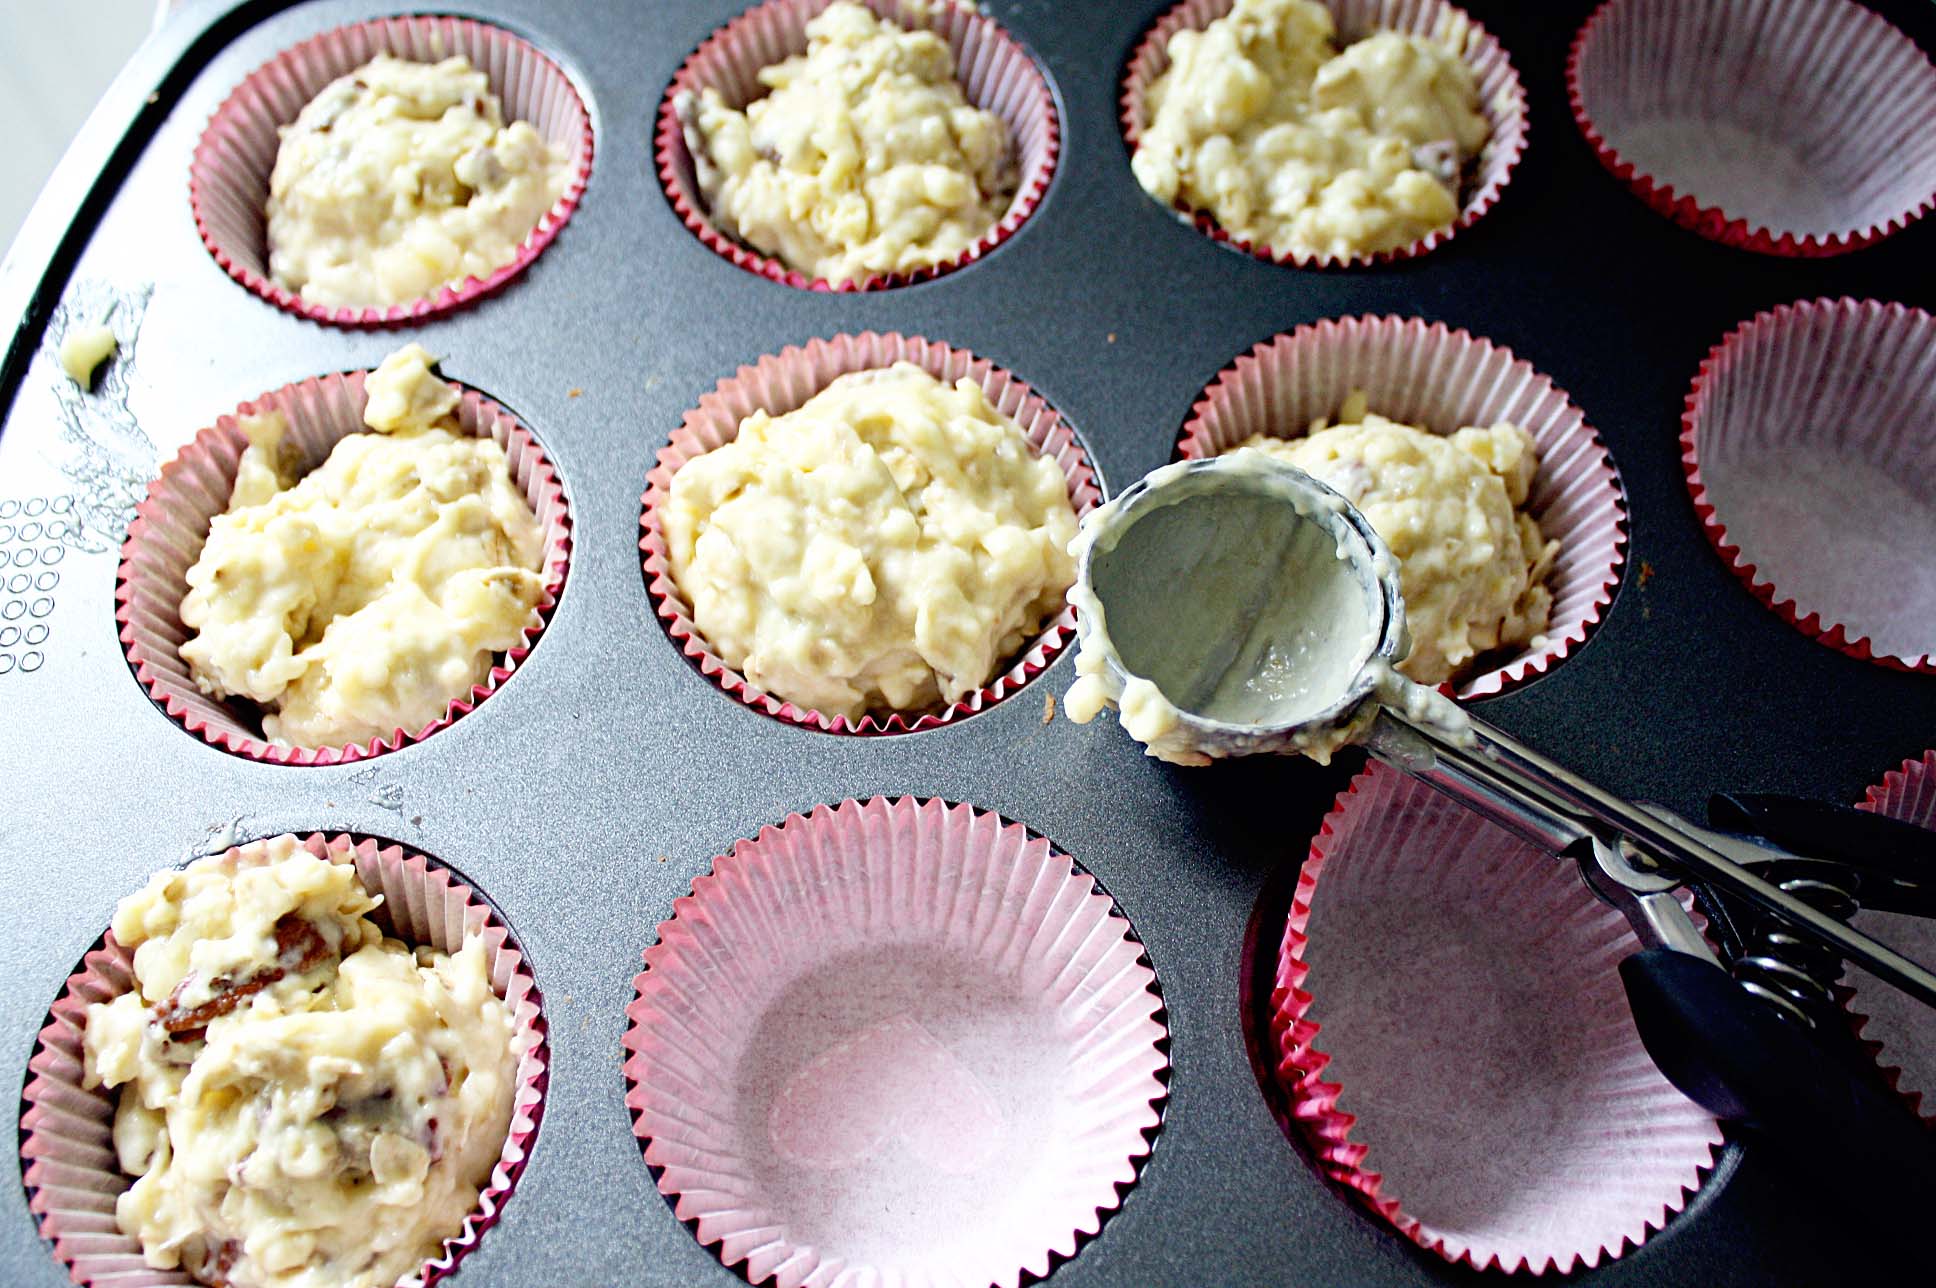 Batter in Muffins cups